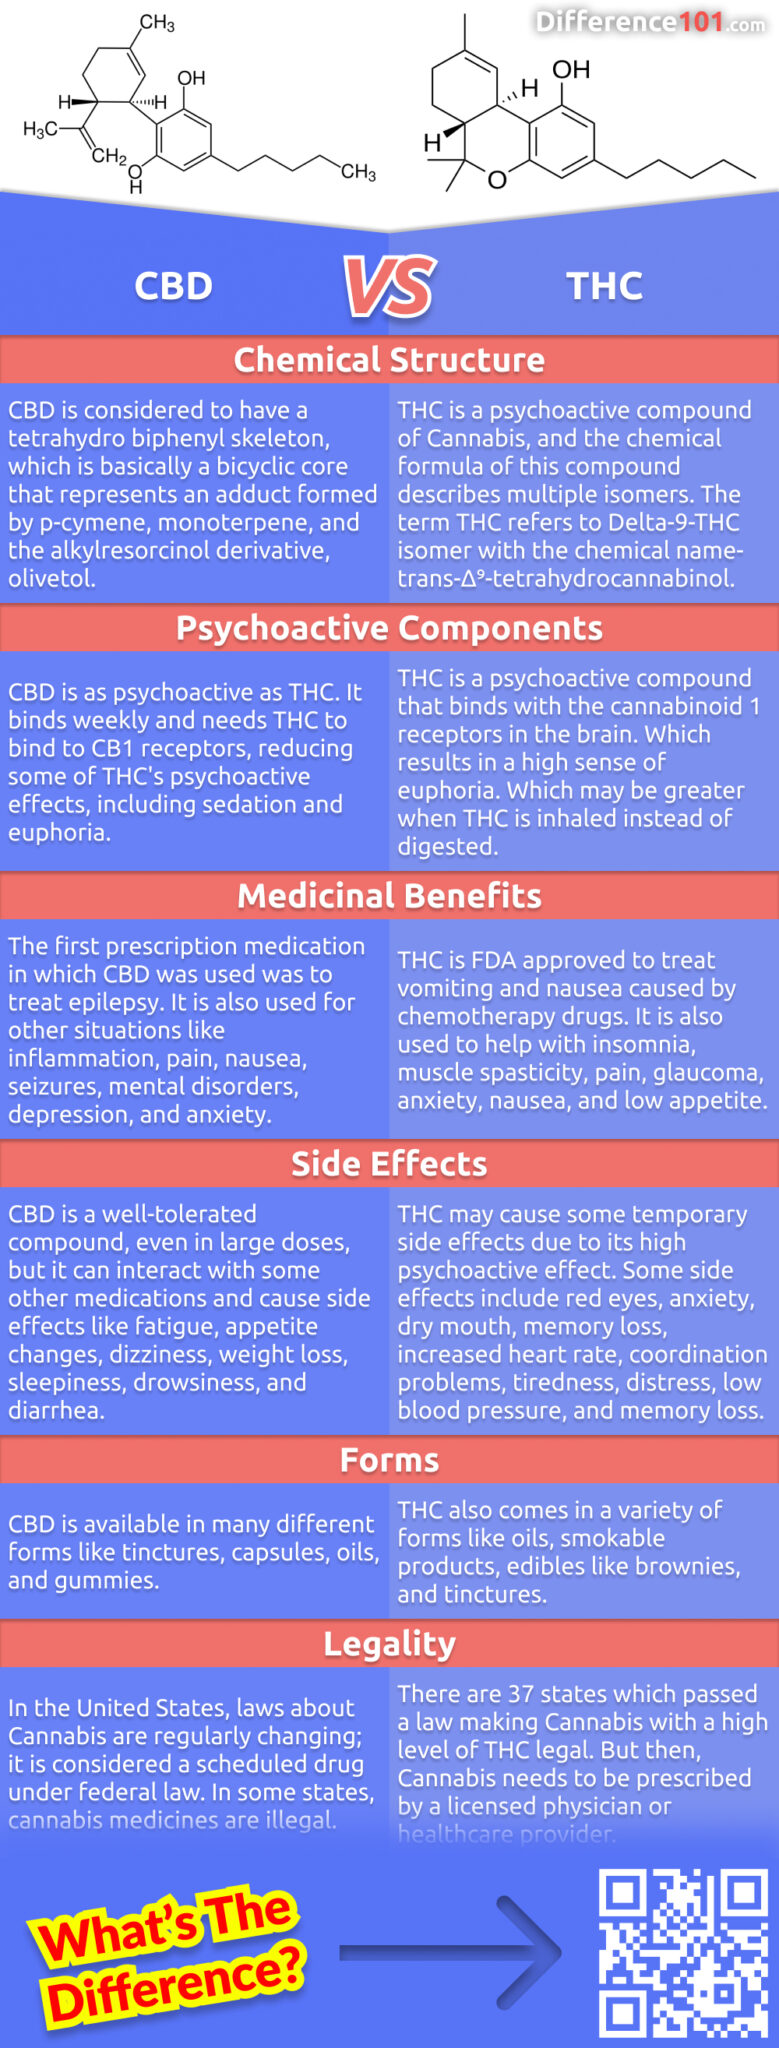 CBD and THC are the two main active ingredients in cannabis. But what are the differences between them? Read on to learn more about the key differences between CBD and THC, their pros and cons, and examples of each.